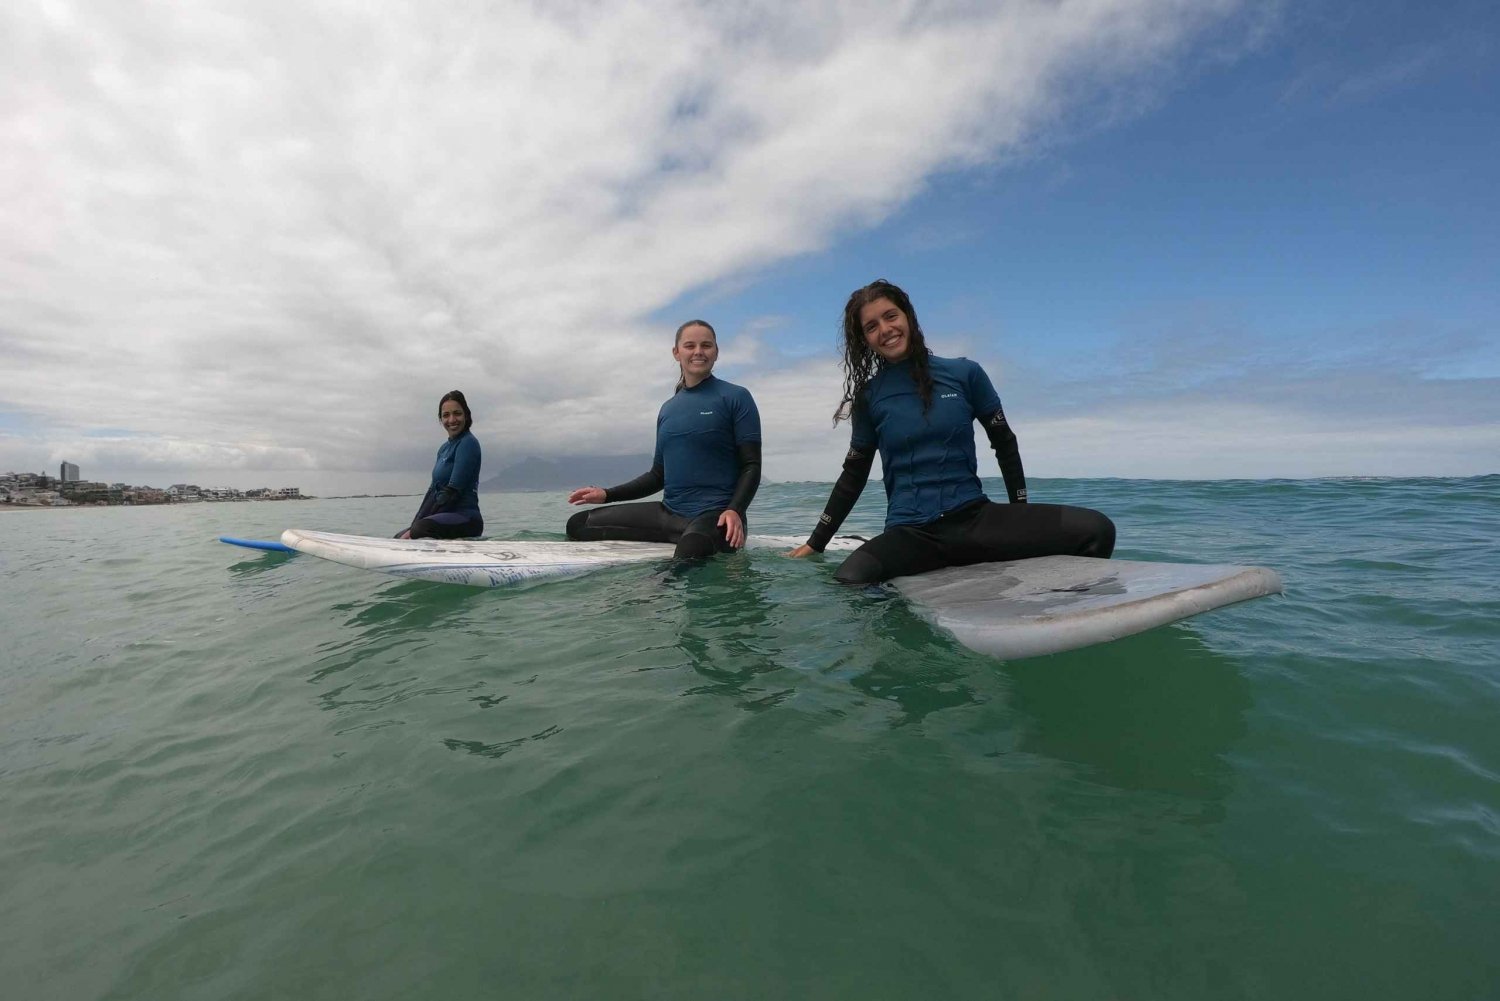 Cape Town: Learn to surf with the view of Table Mountain